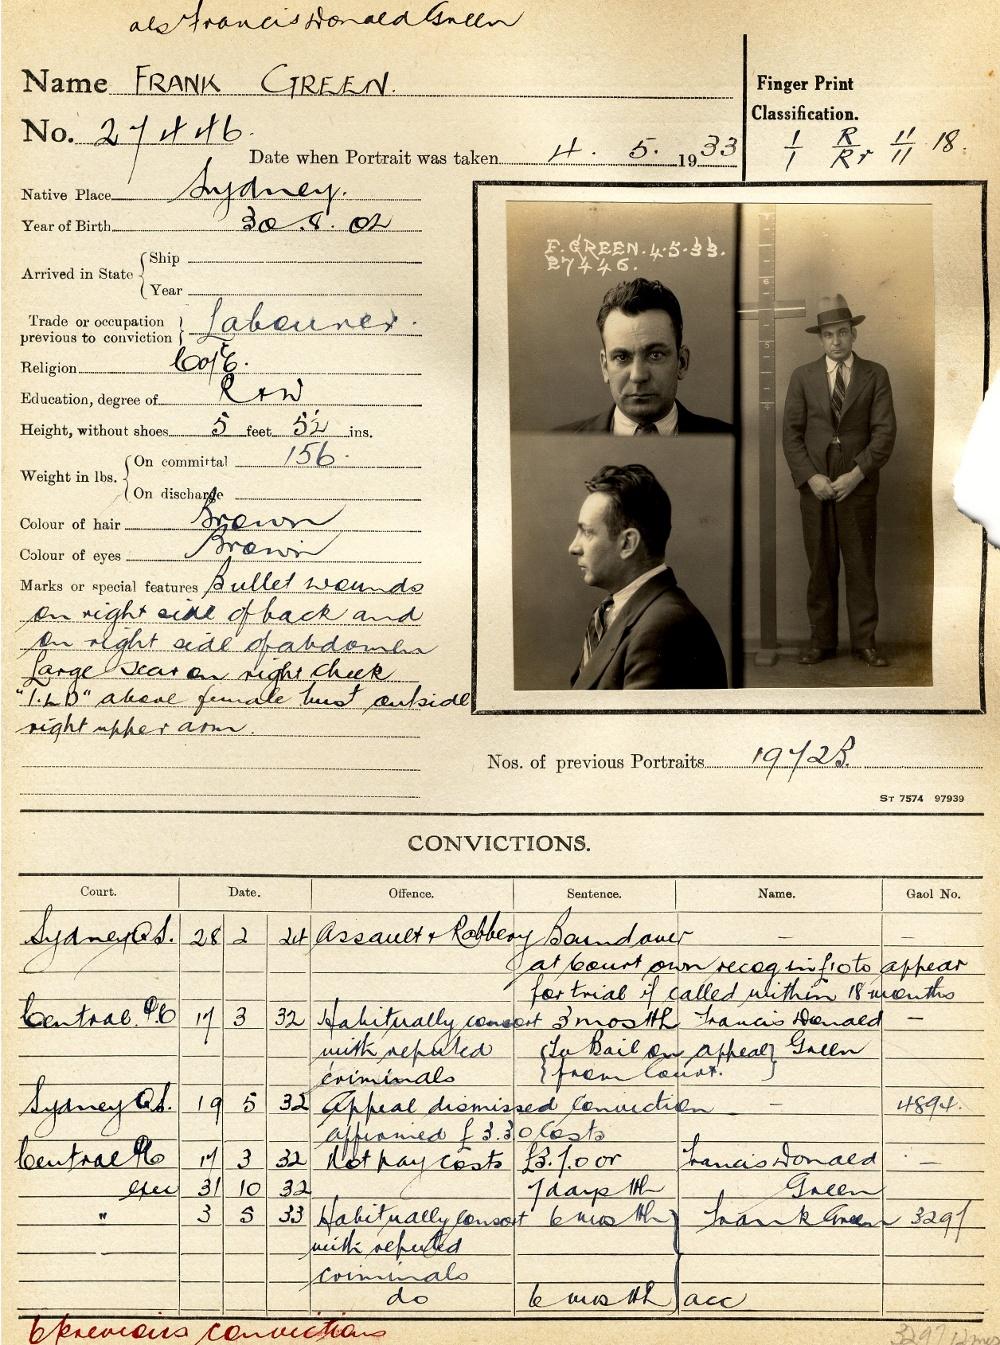 Mugshots and conviction record for Frank Green